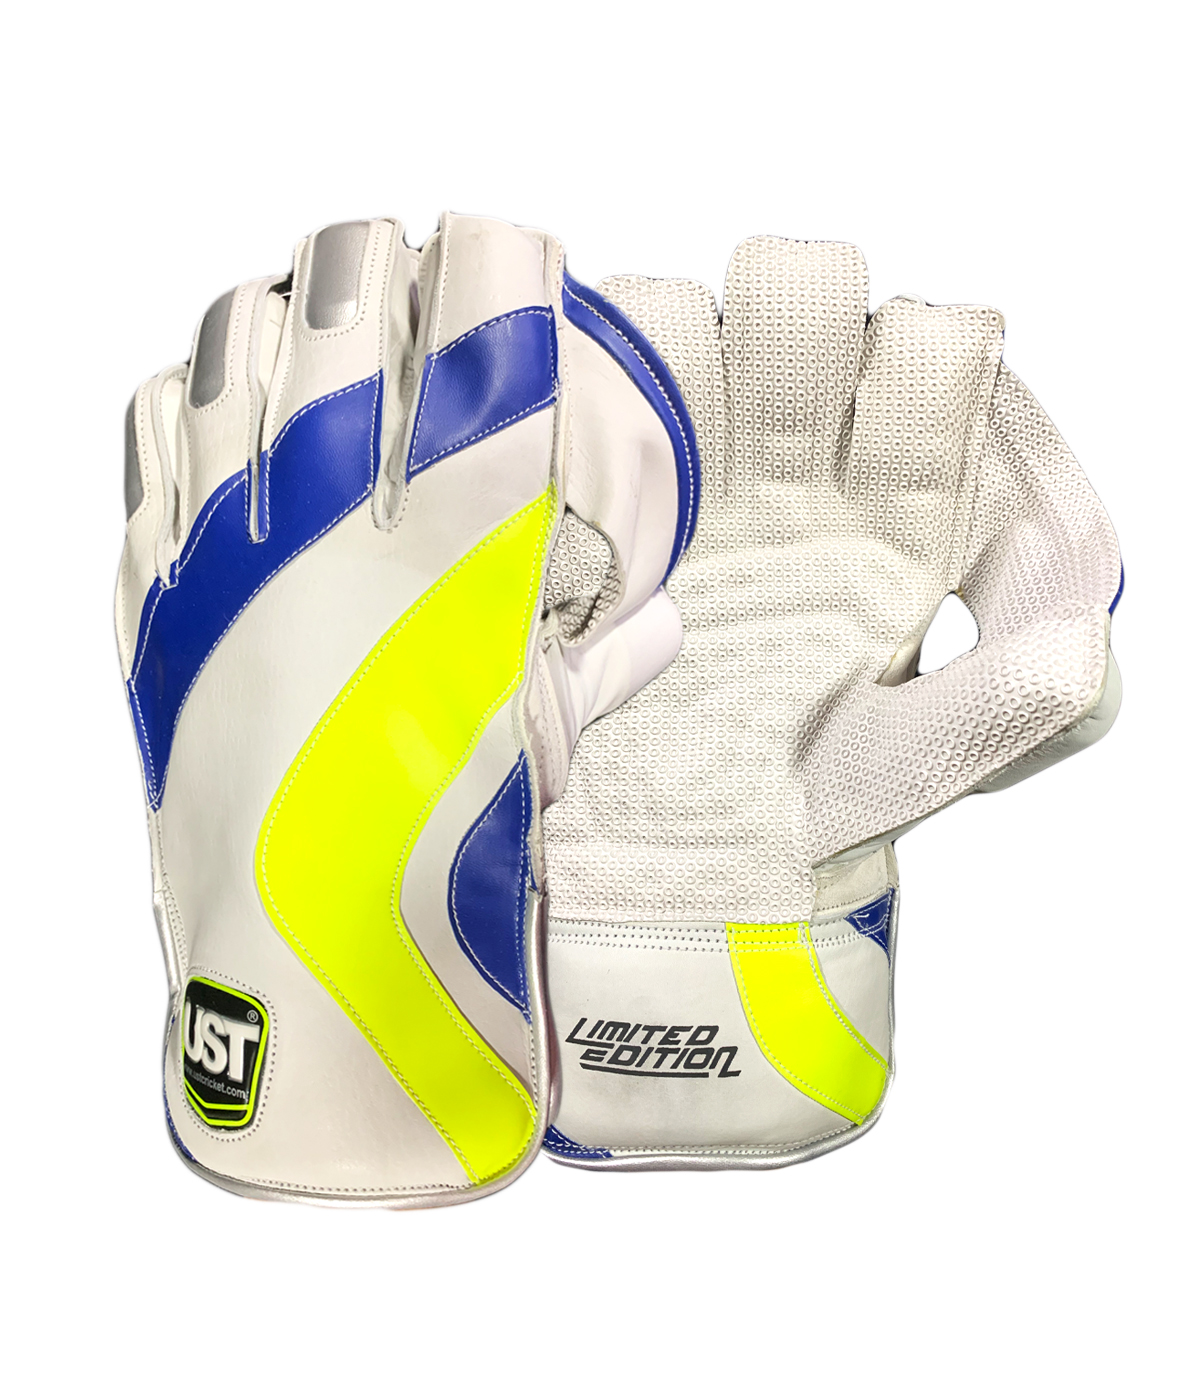 New Reebok Limited Edition Cricket Wicket Keeping Gloves Shipped Free From USA 